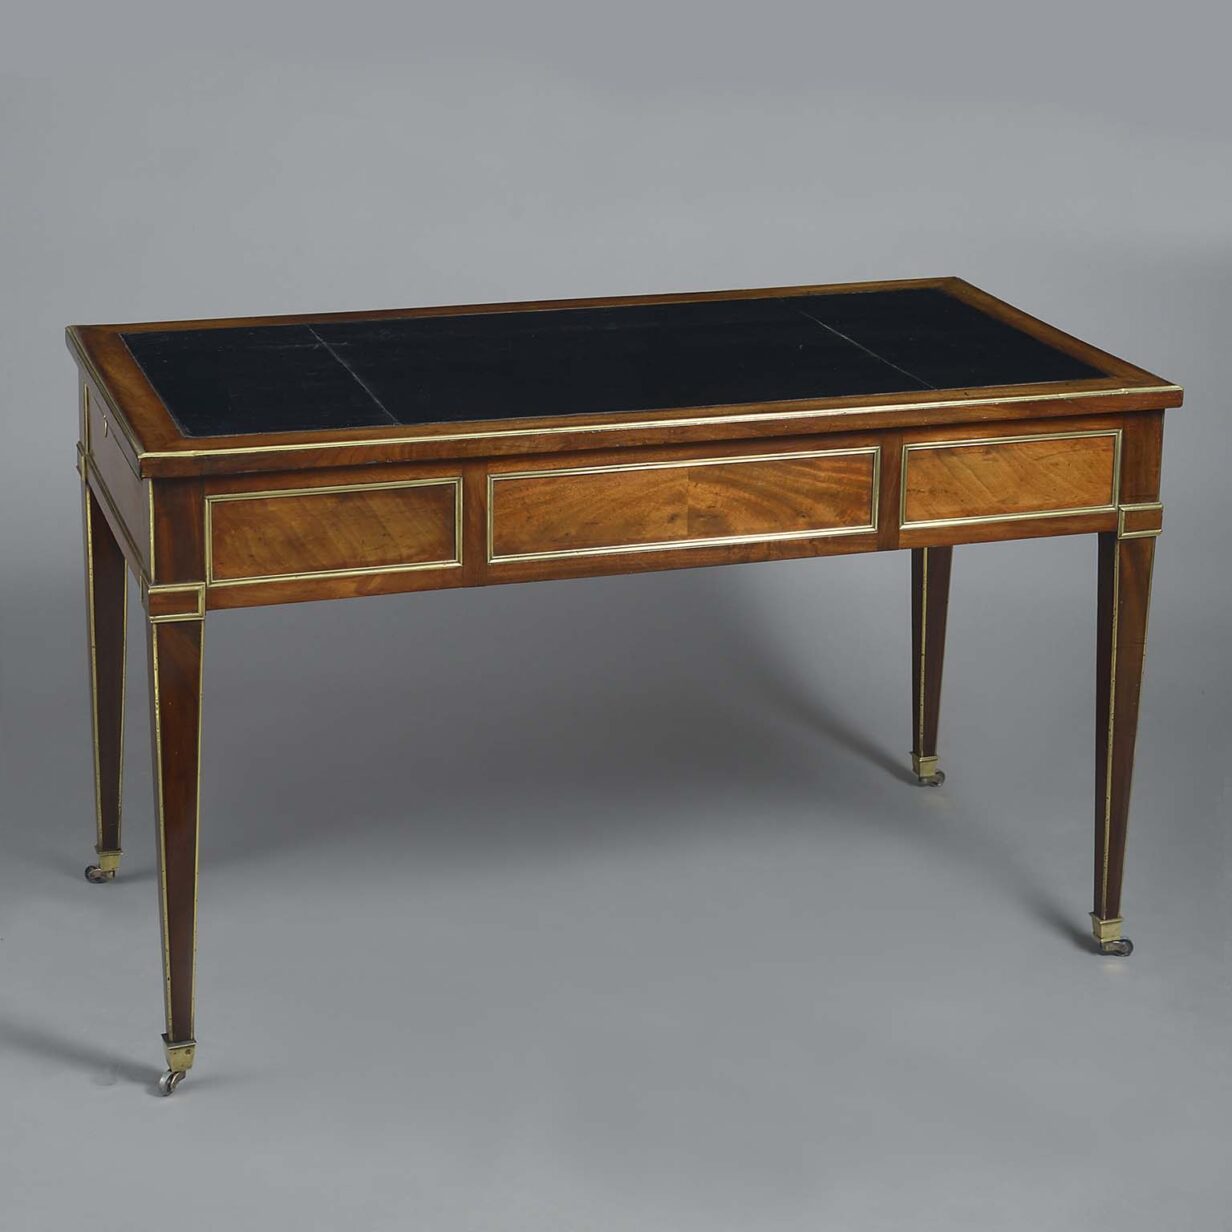 Louis xvi period mahogany and brass mounted writing table